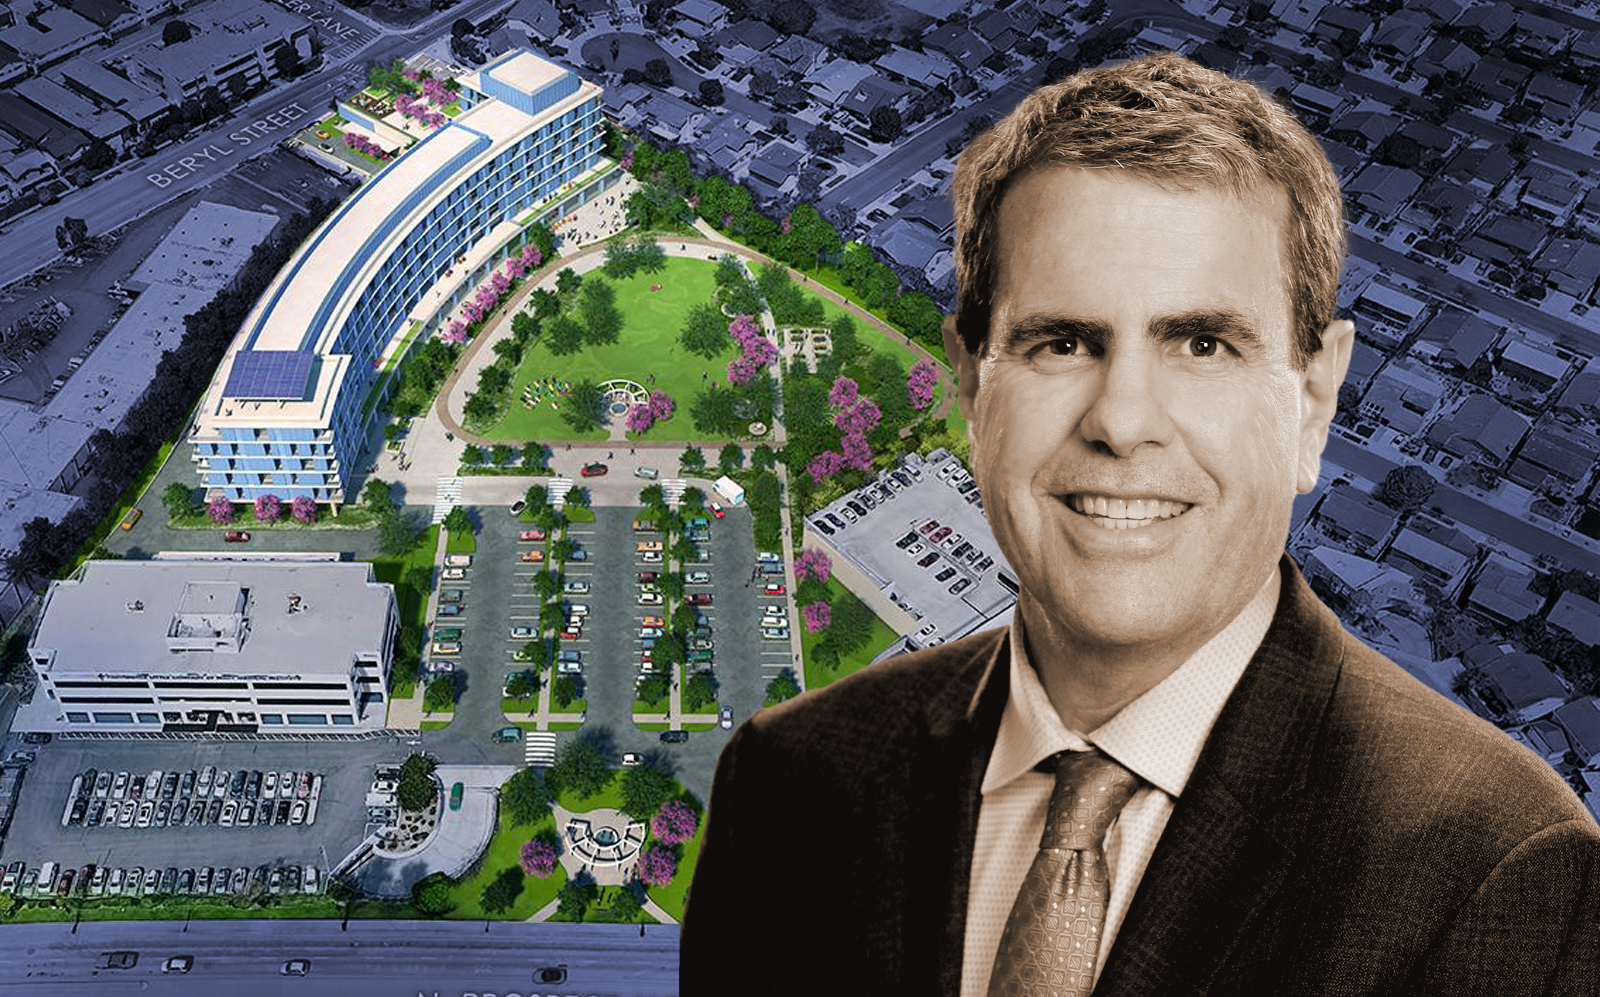 Beach Cities Health District CEO Tom Bakaly and renderings of the Redondo Beach campus. (BCHD)